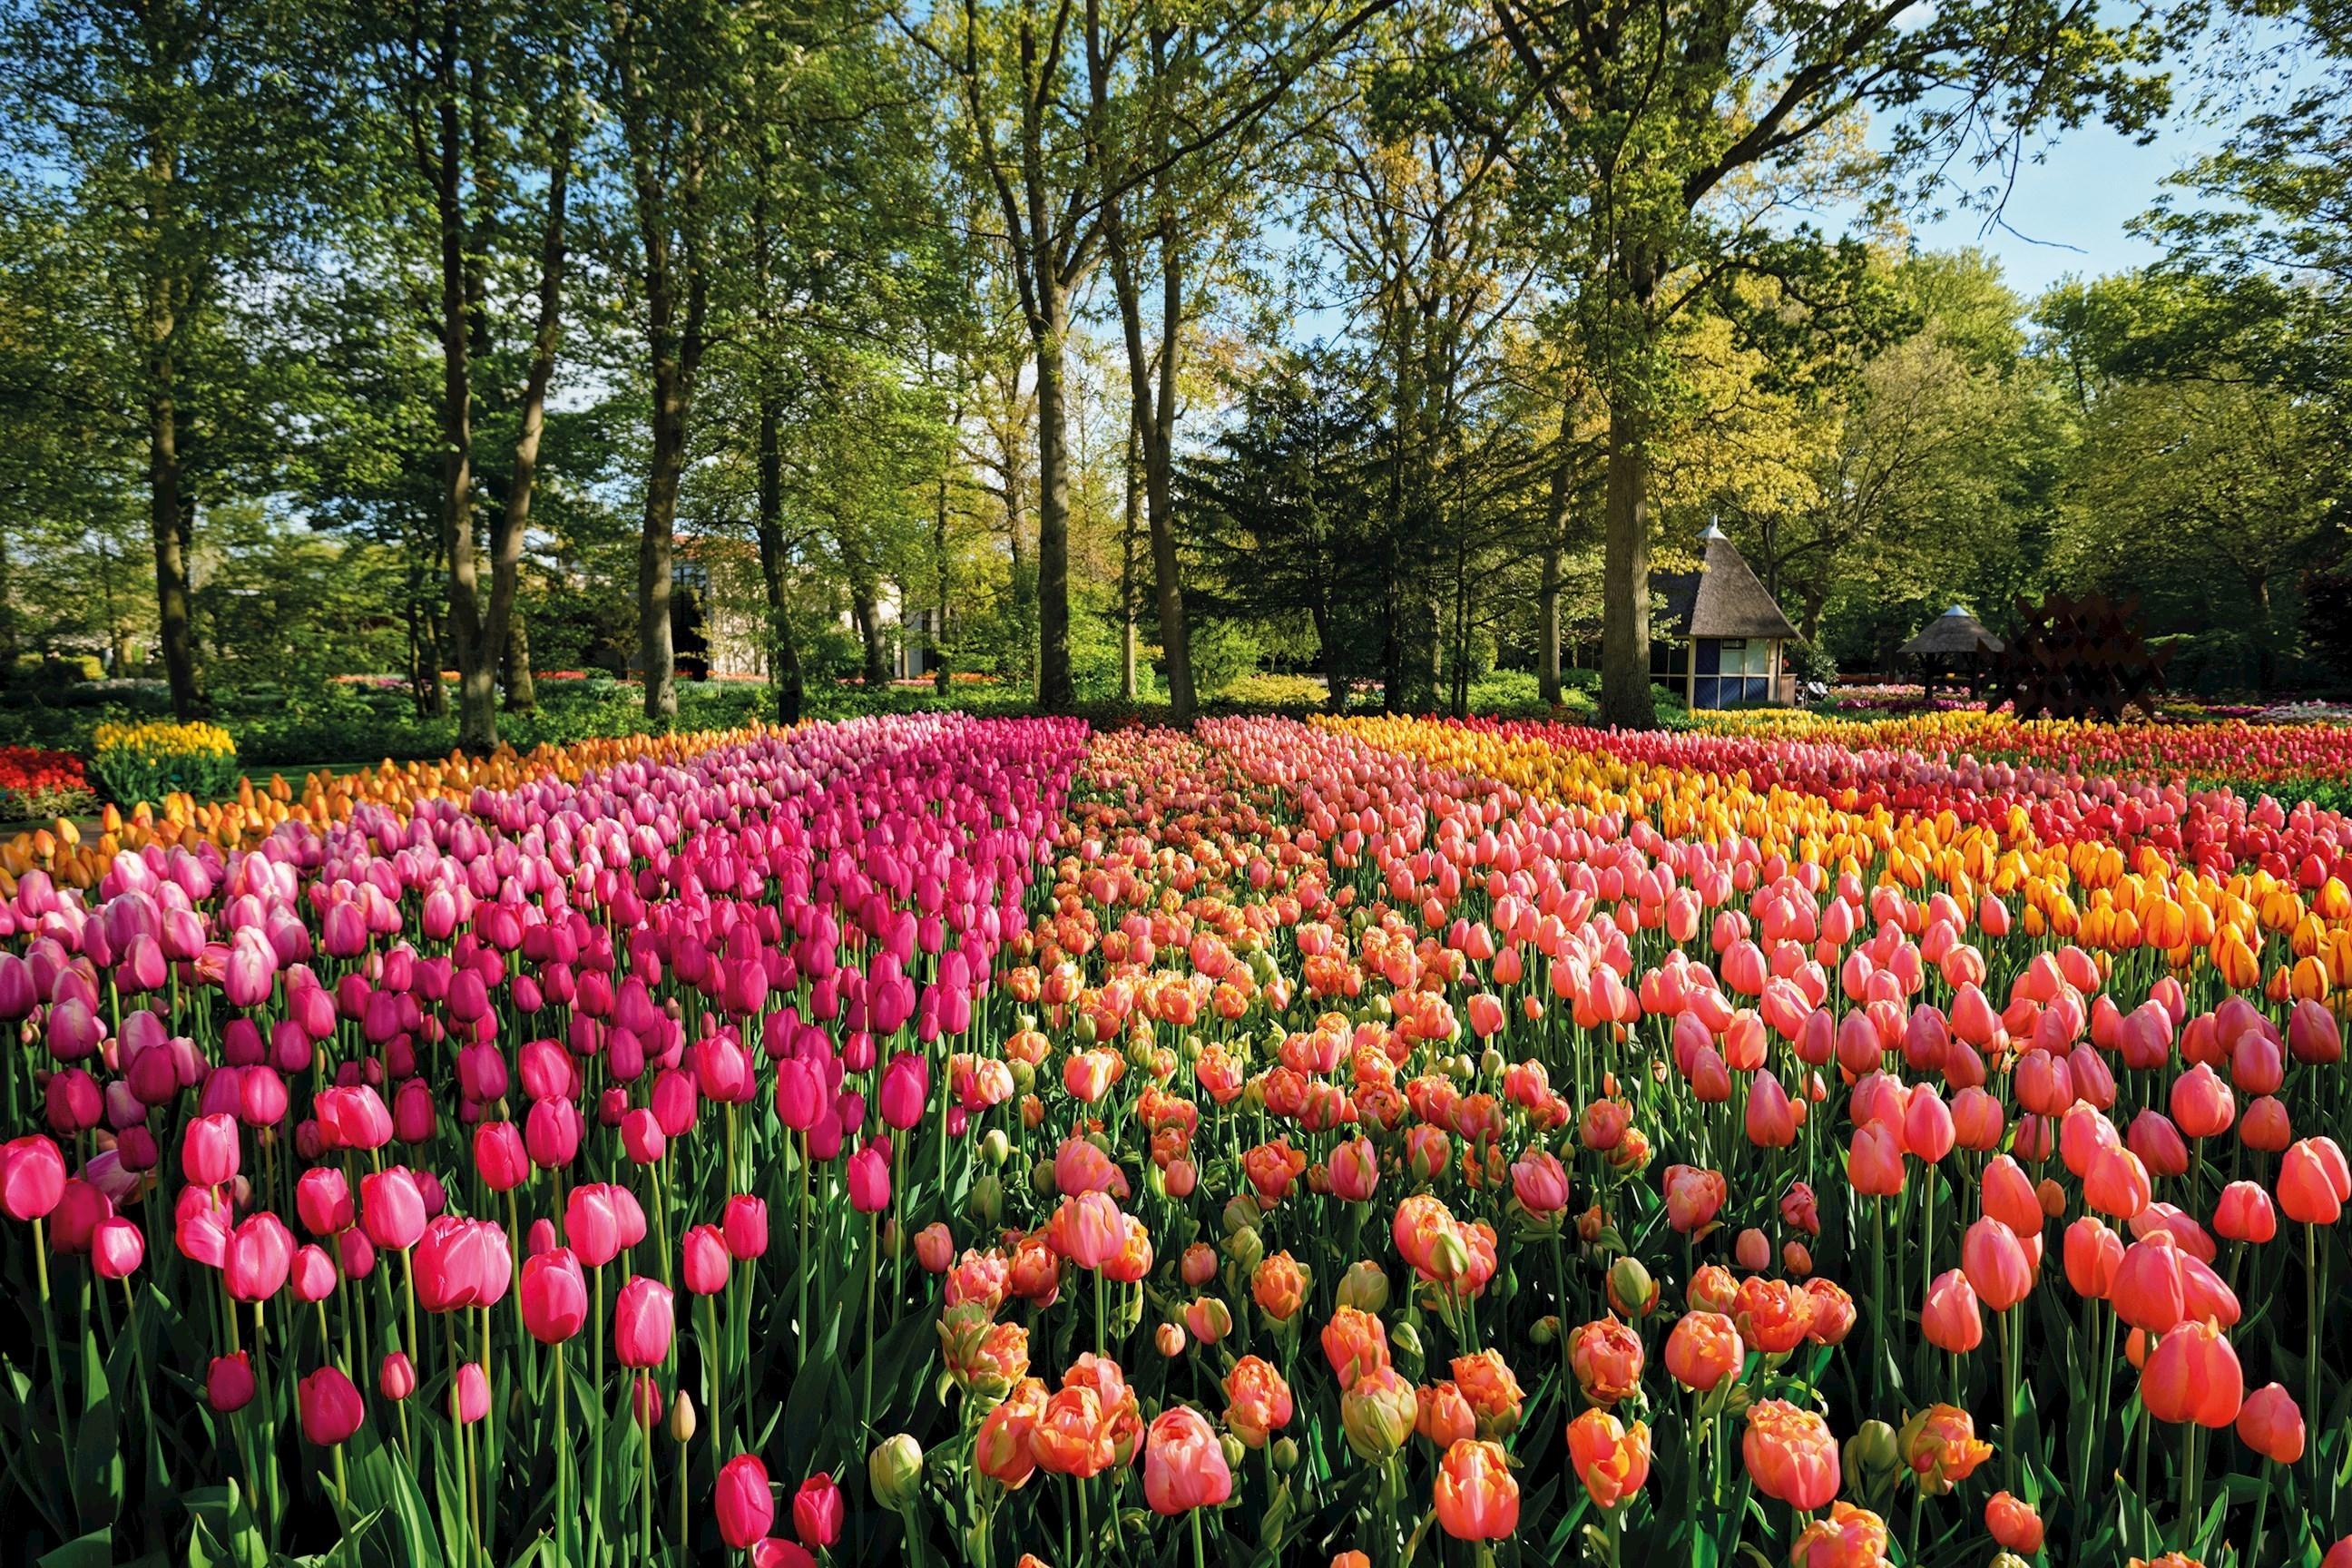 Chelsea Flower Show and Springtime Alps Guided Tour